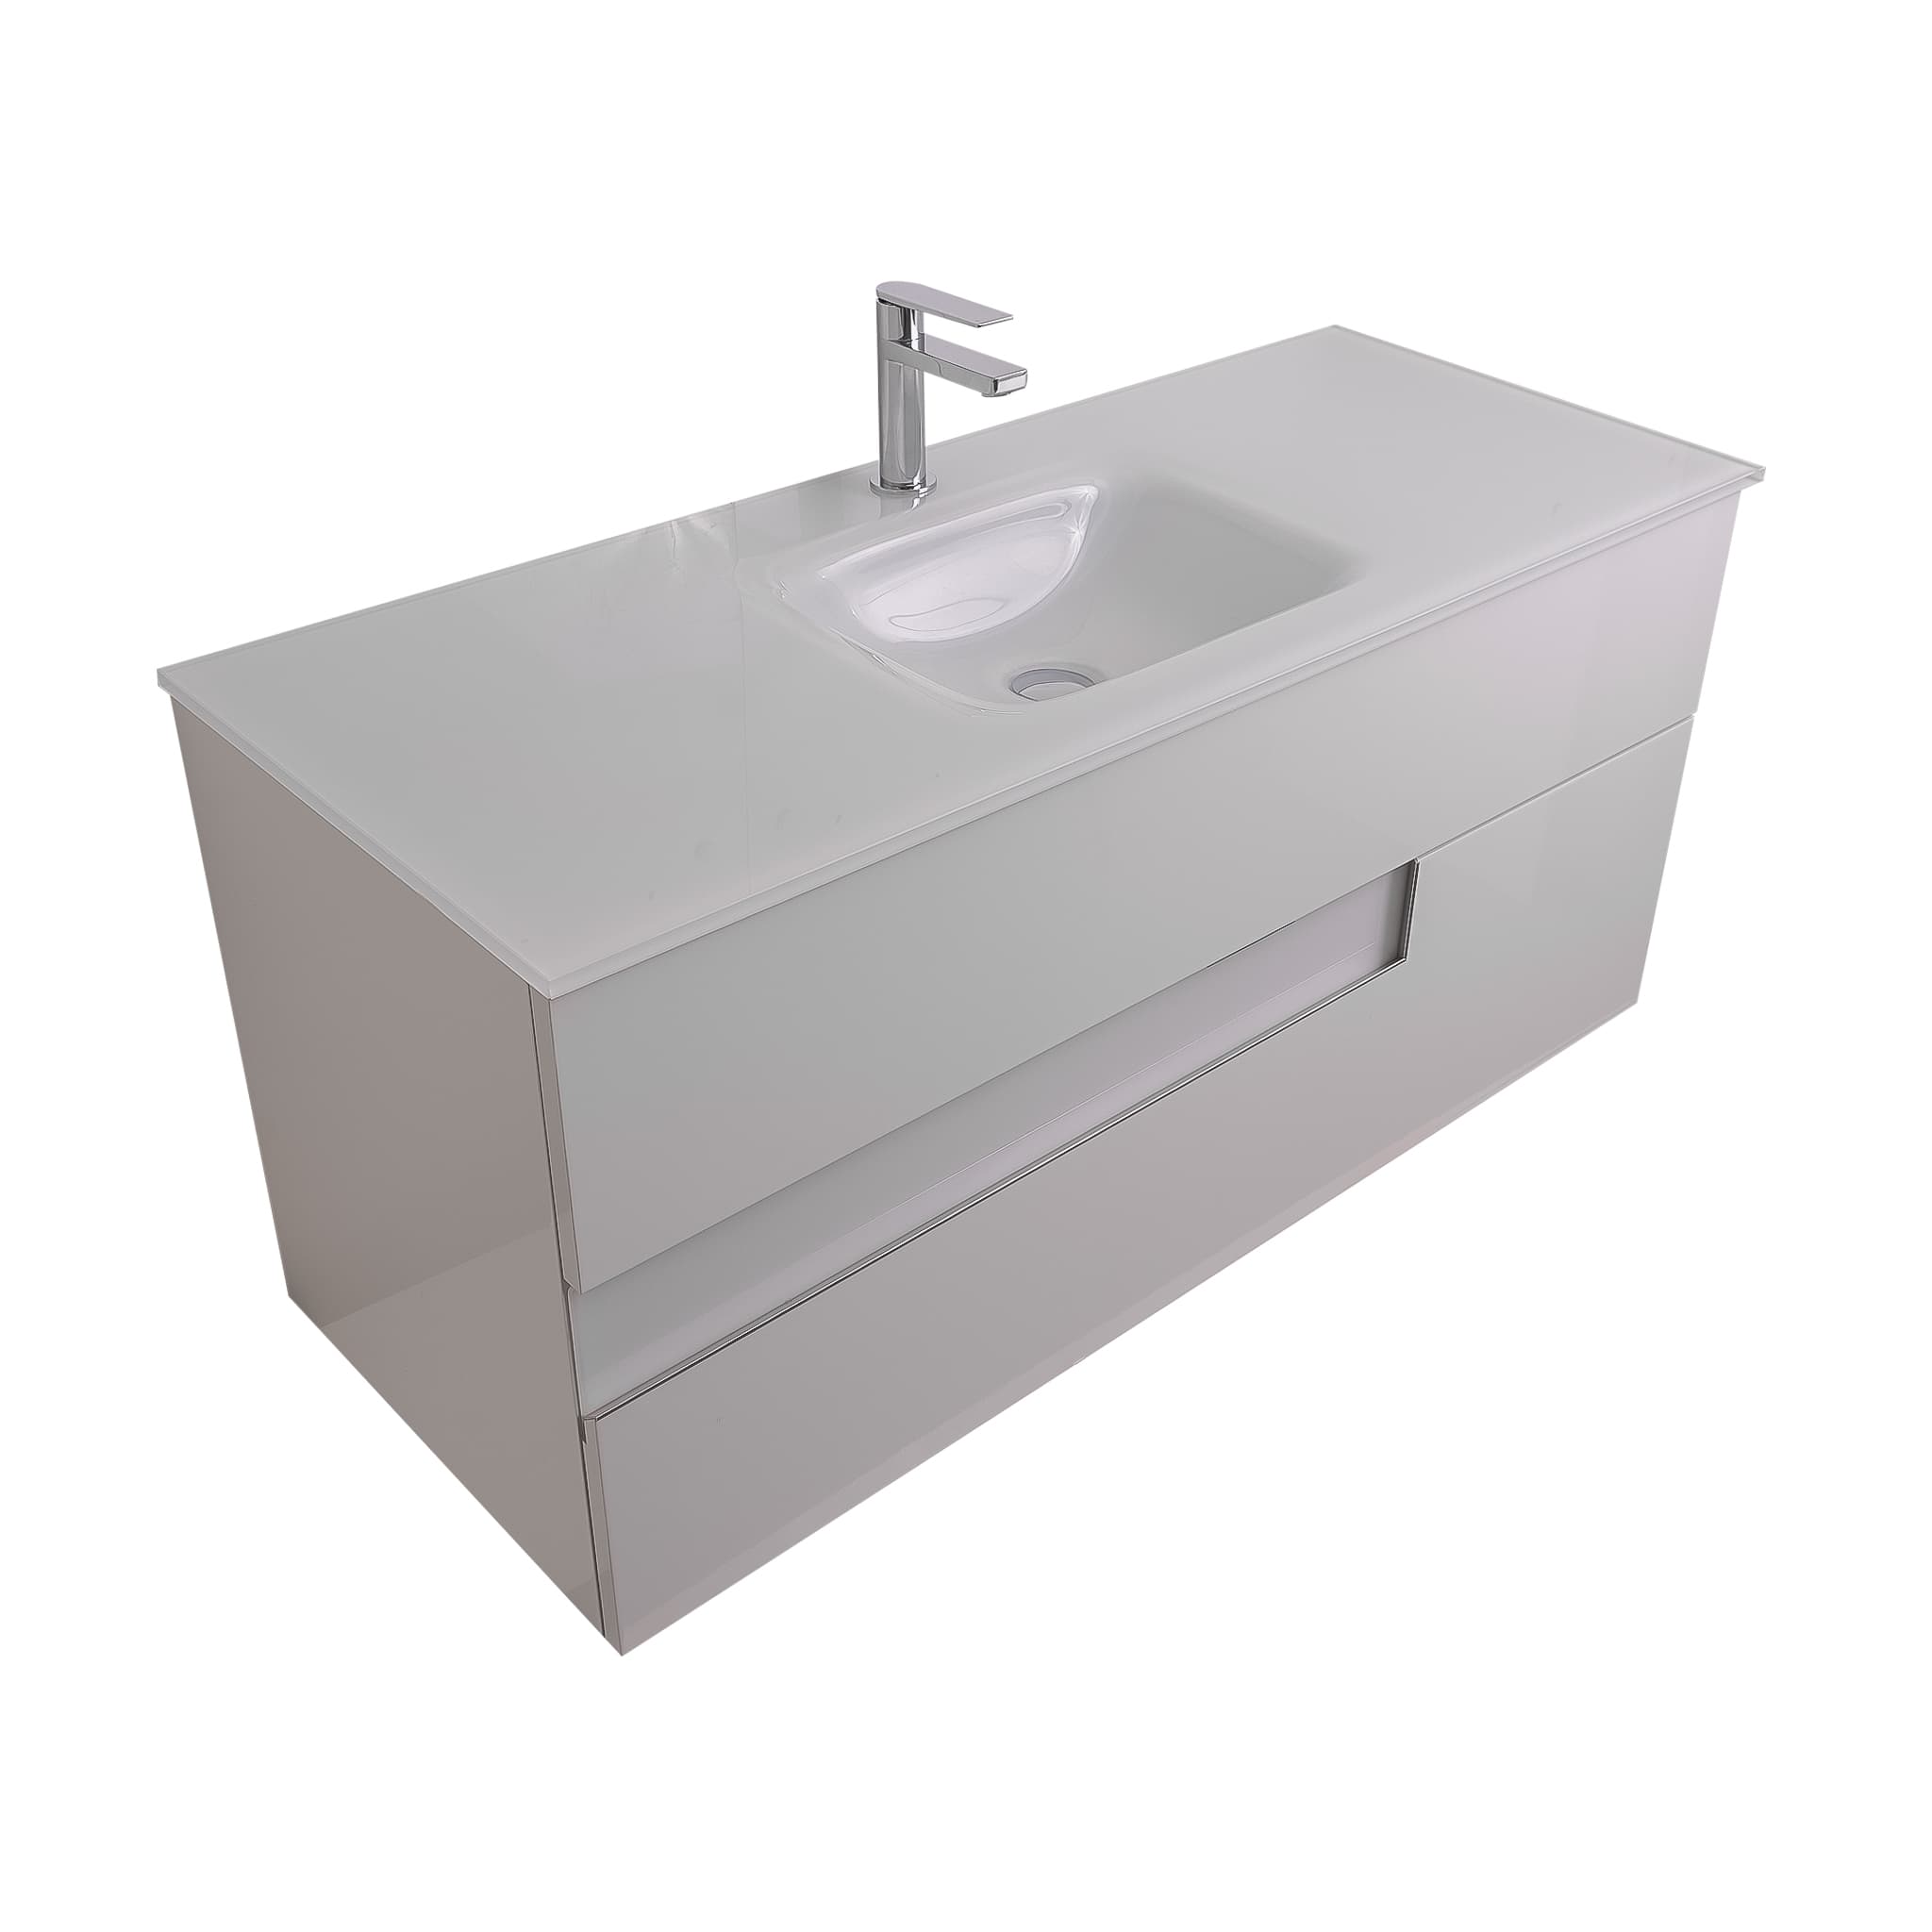 Vision 47.5 White High Gloss Cabinet, White Tempered Glass Sink, Wall Mounted Modern Vanity Set